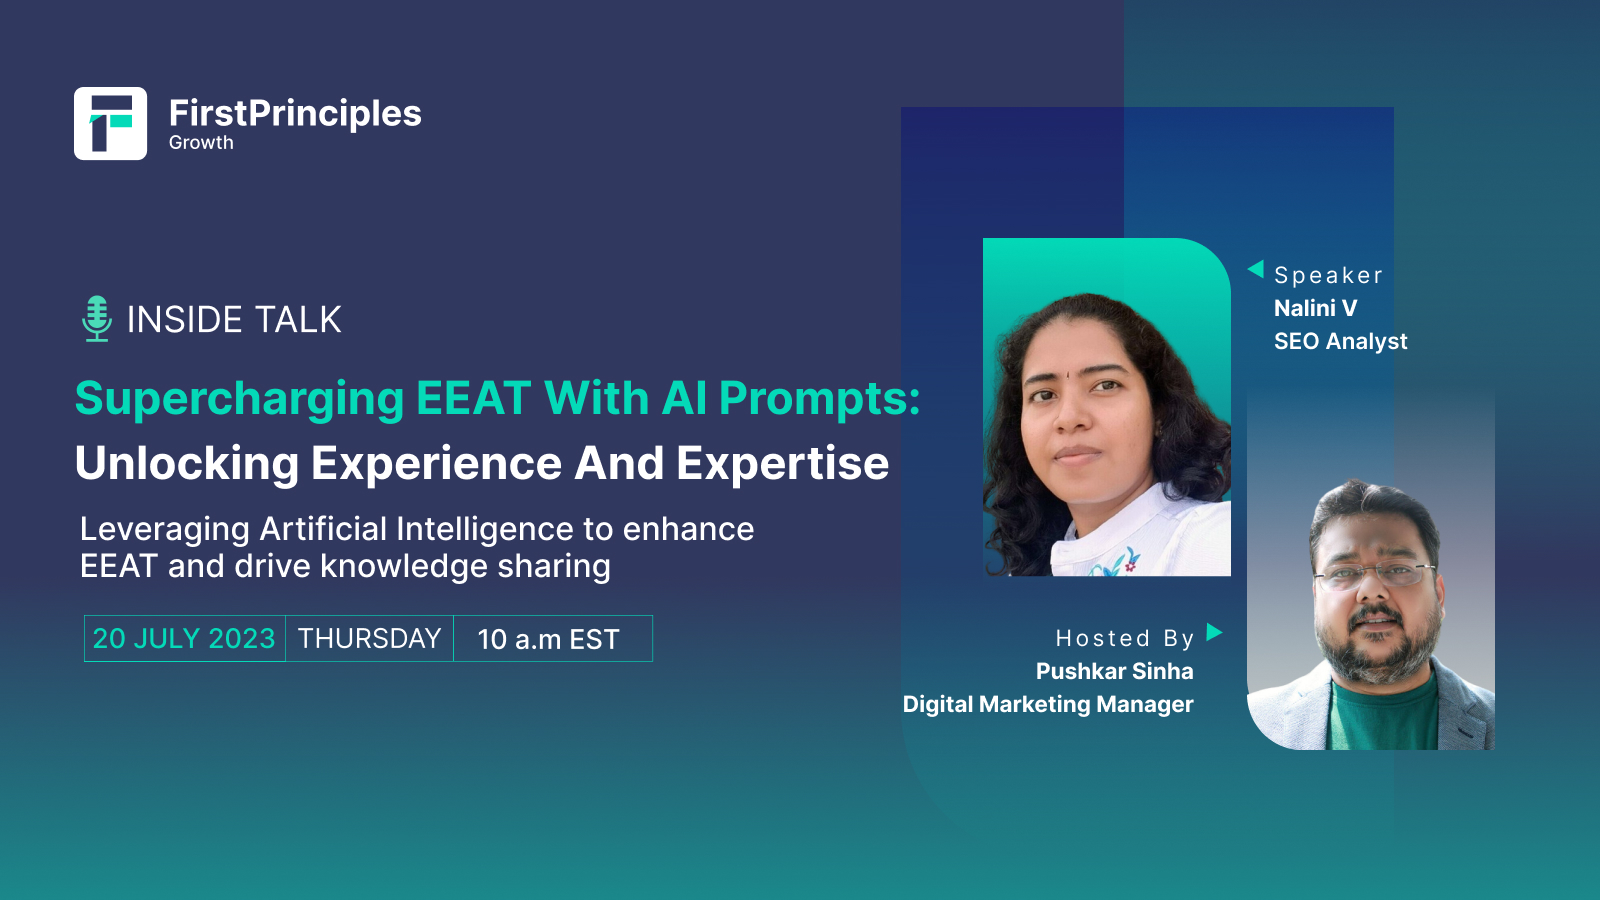 Supercharging EEAT with AI Prompts: Unlocking Experience and Expertise